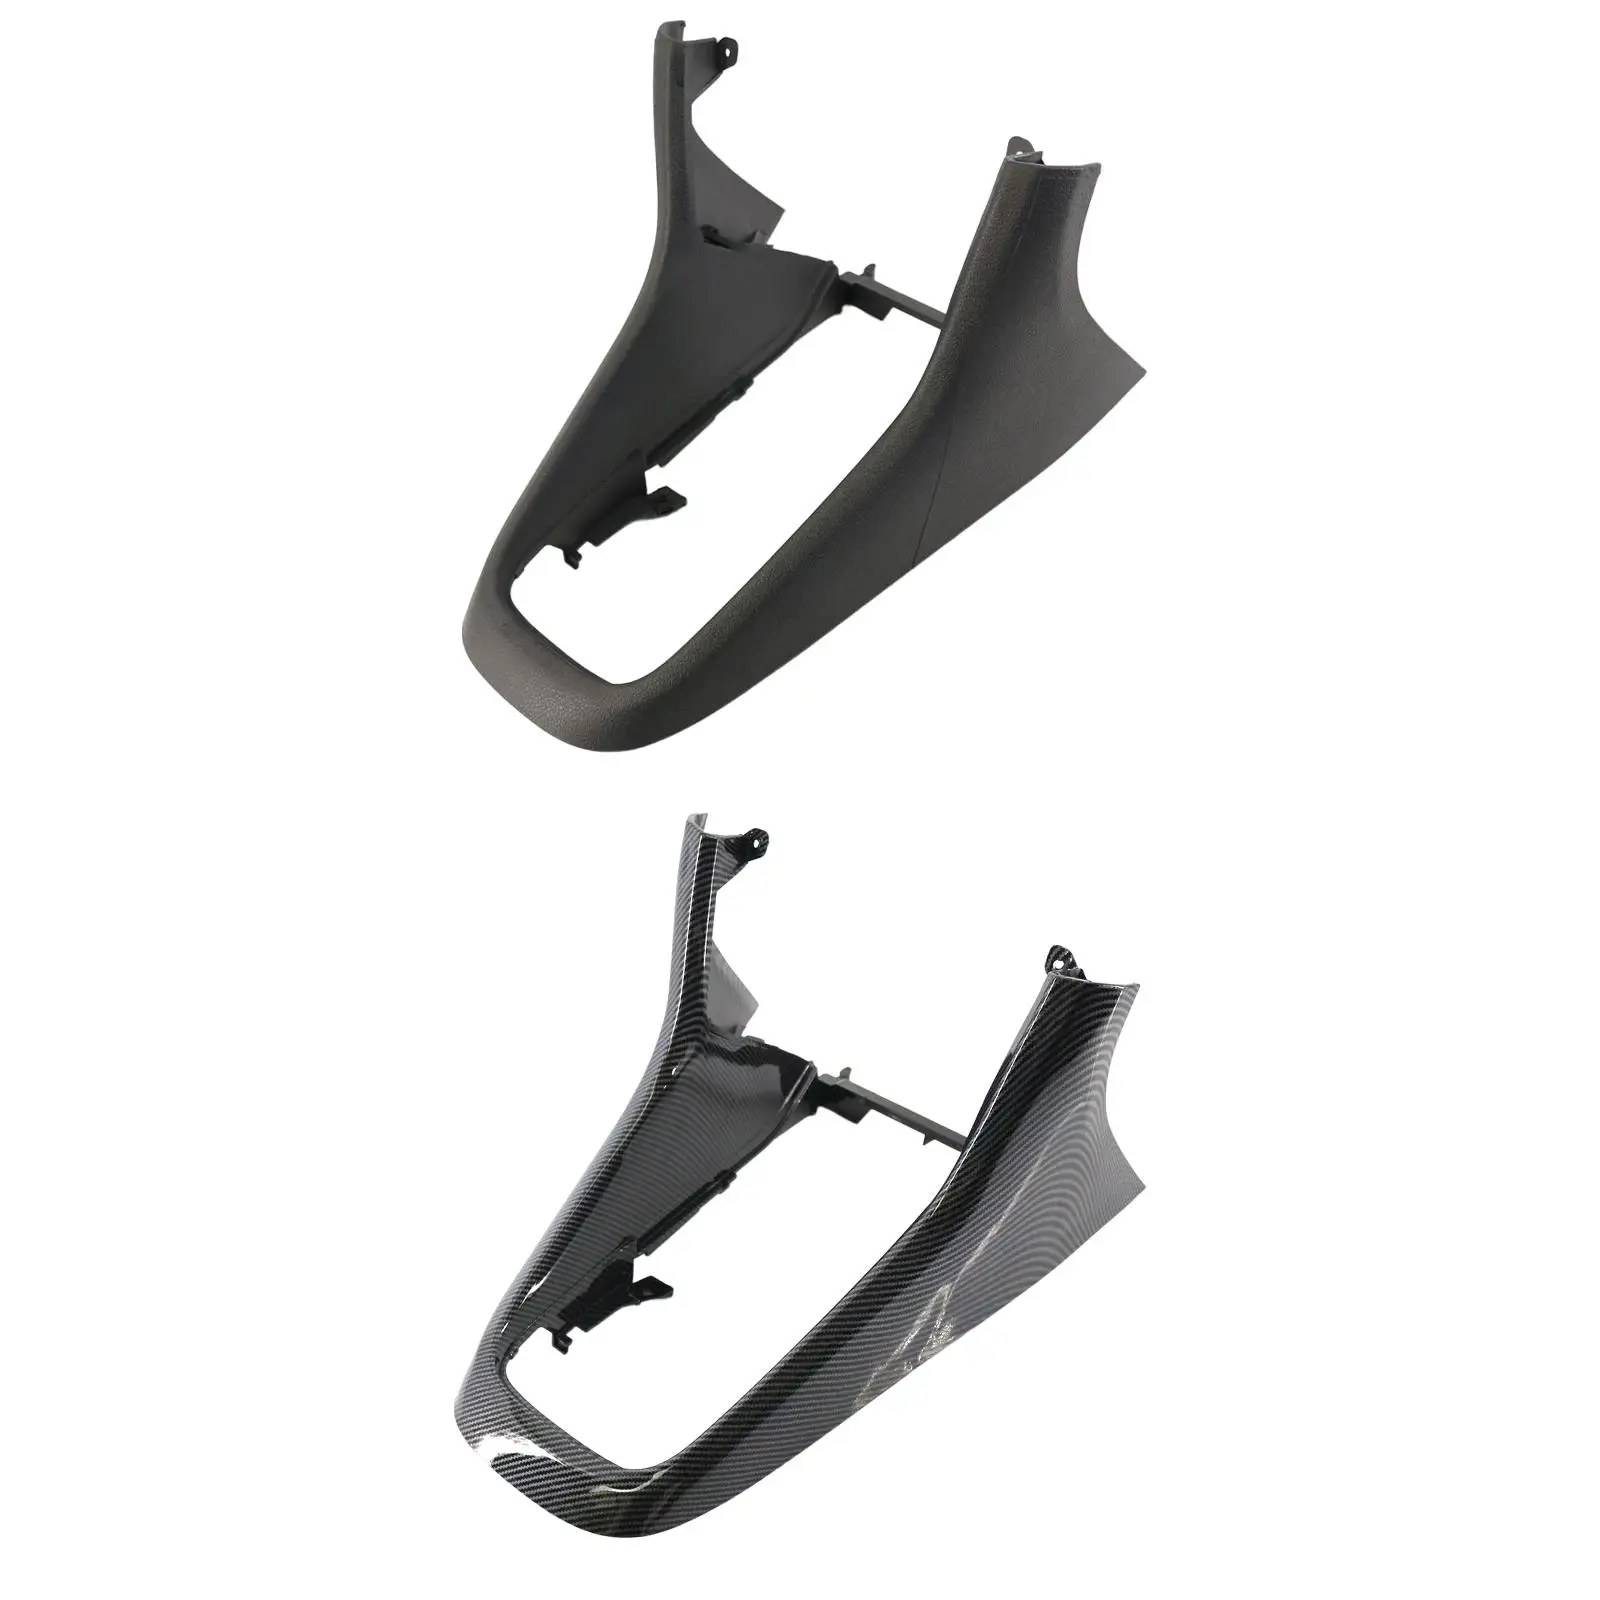 5K0863680 Front Console Cover for VW Golf MK6 Easy to Install Accessories High performance